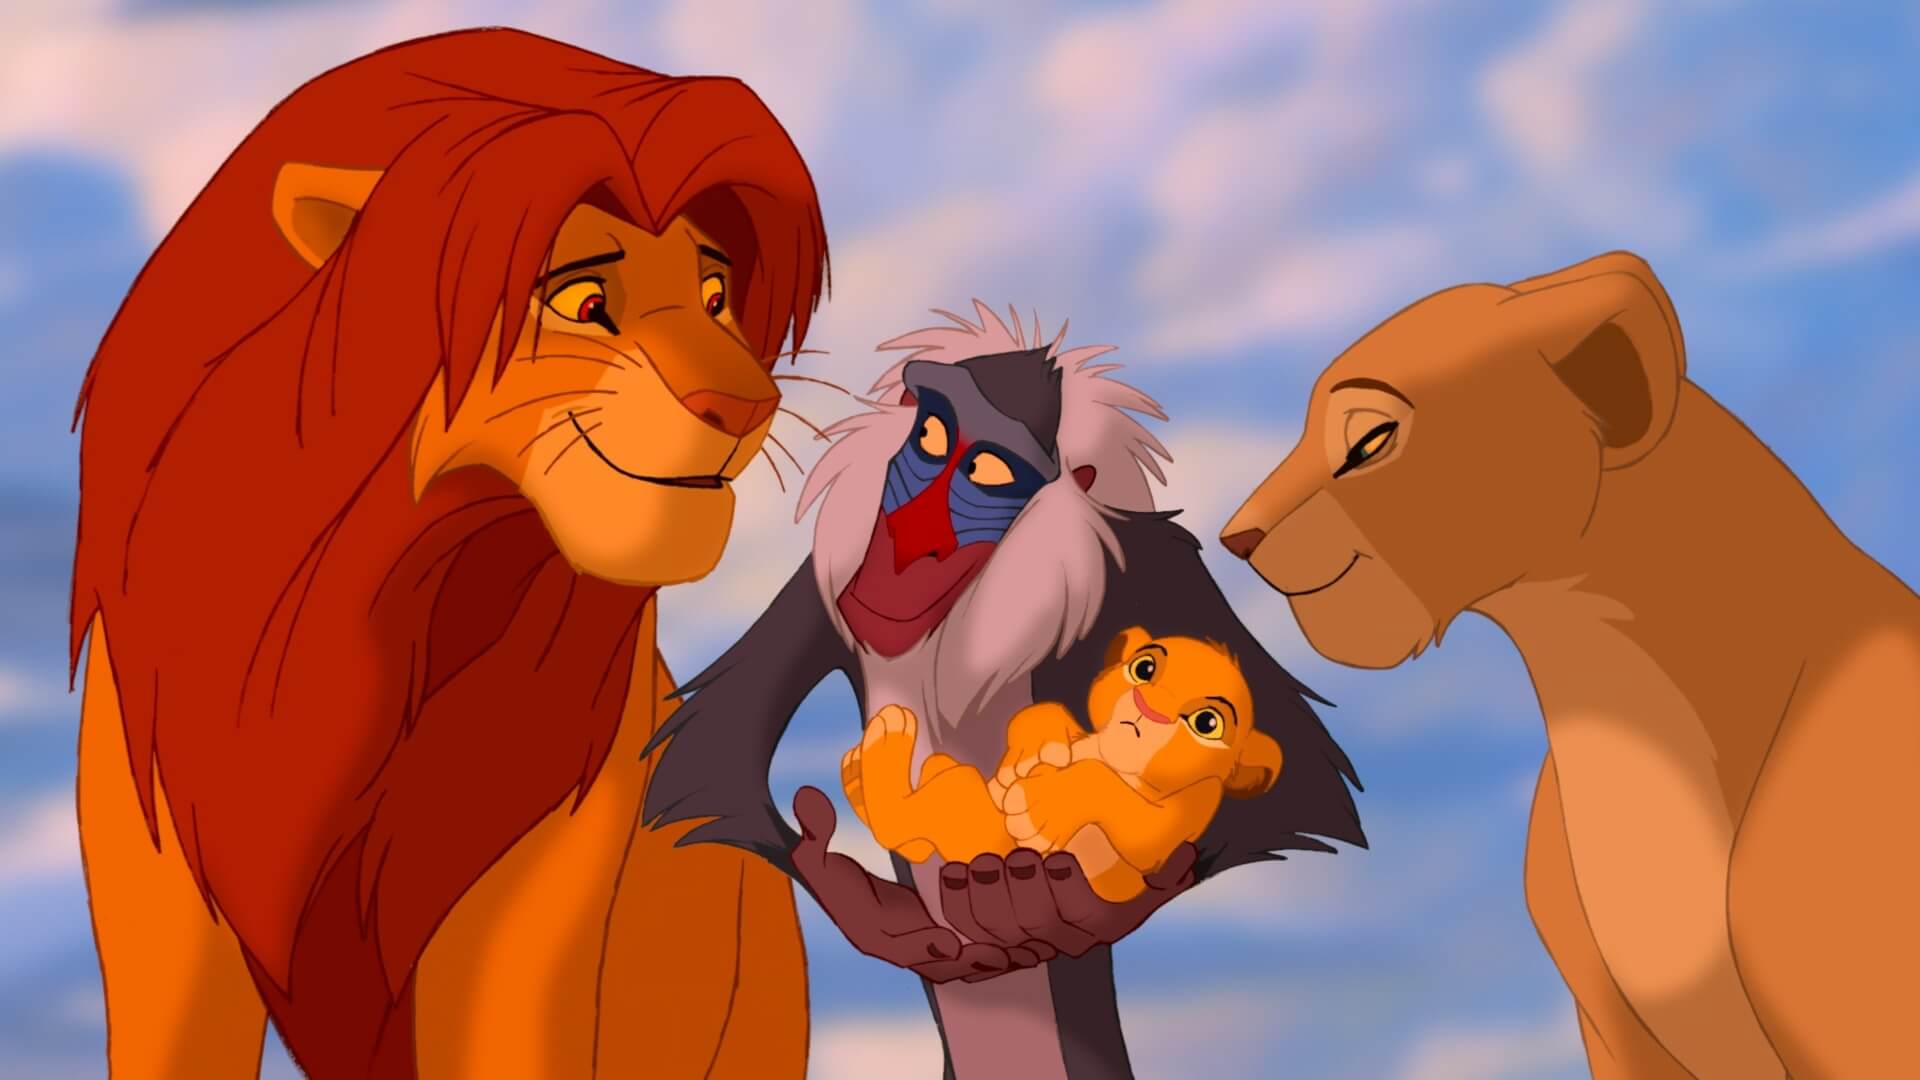 The-Lion-King-(1994)-g-rated-to watch-on-Disney-Plus